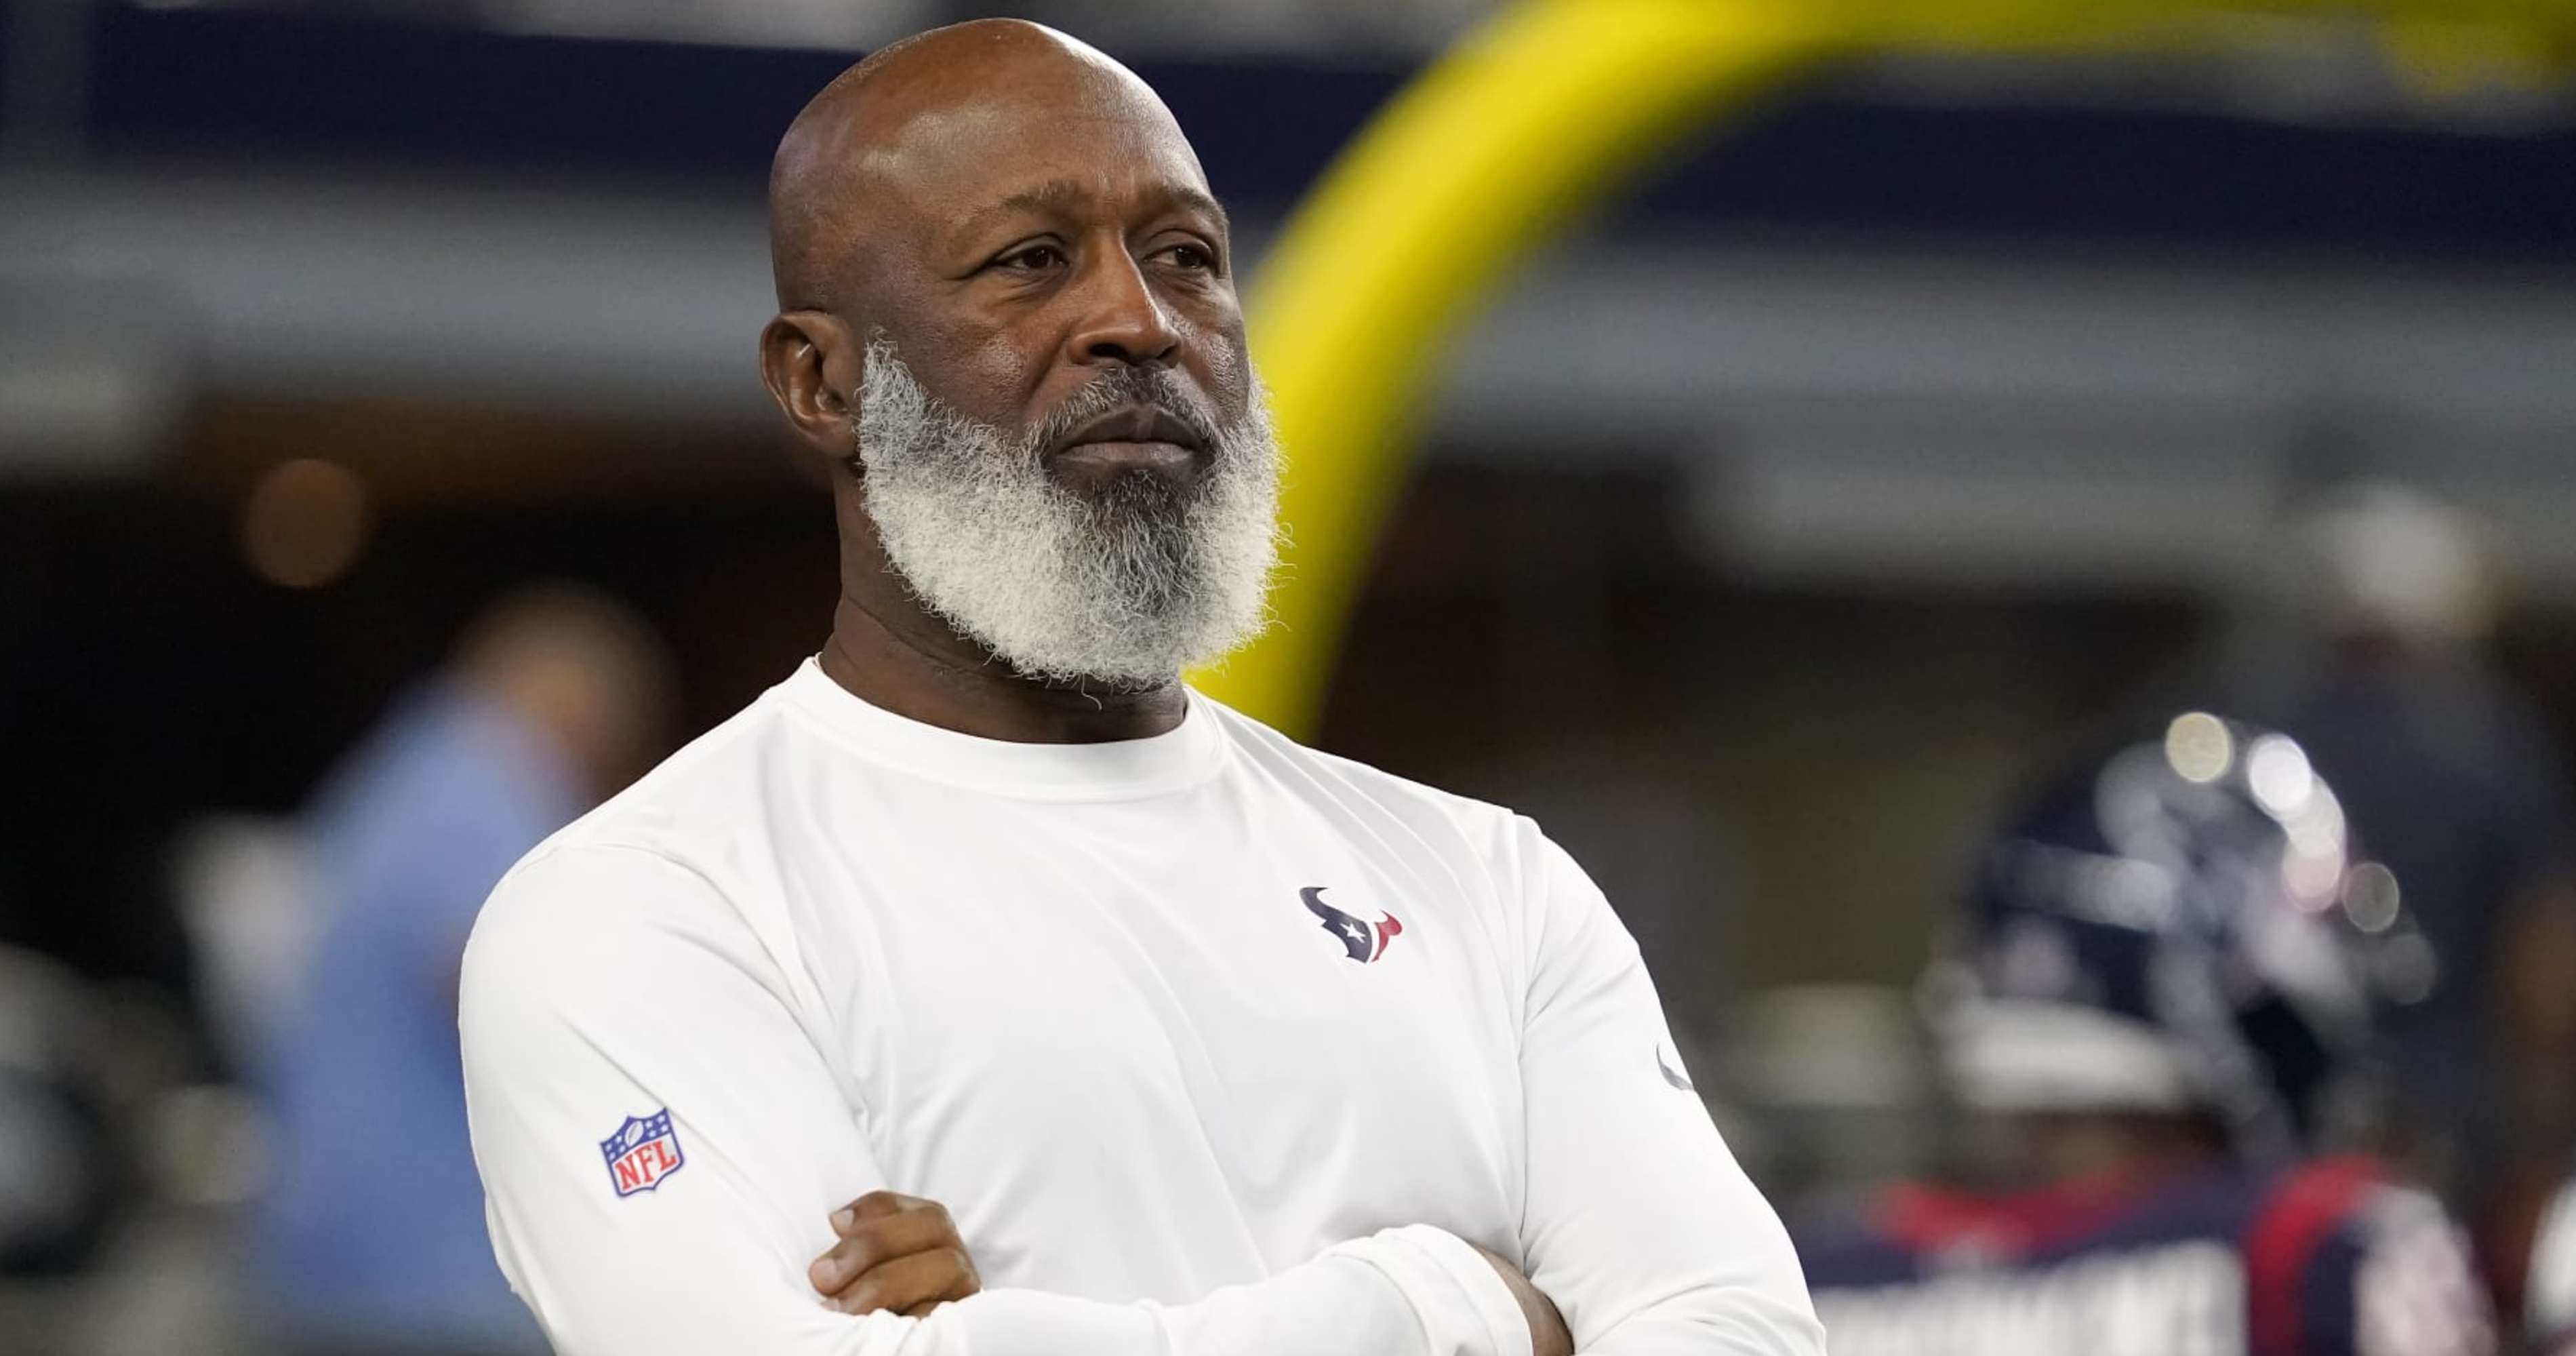 Lovie Smith Fired After 1 Season as Texans HC; Houston Finished 3-13-1